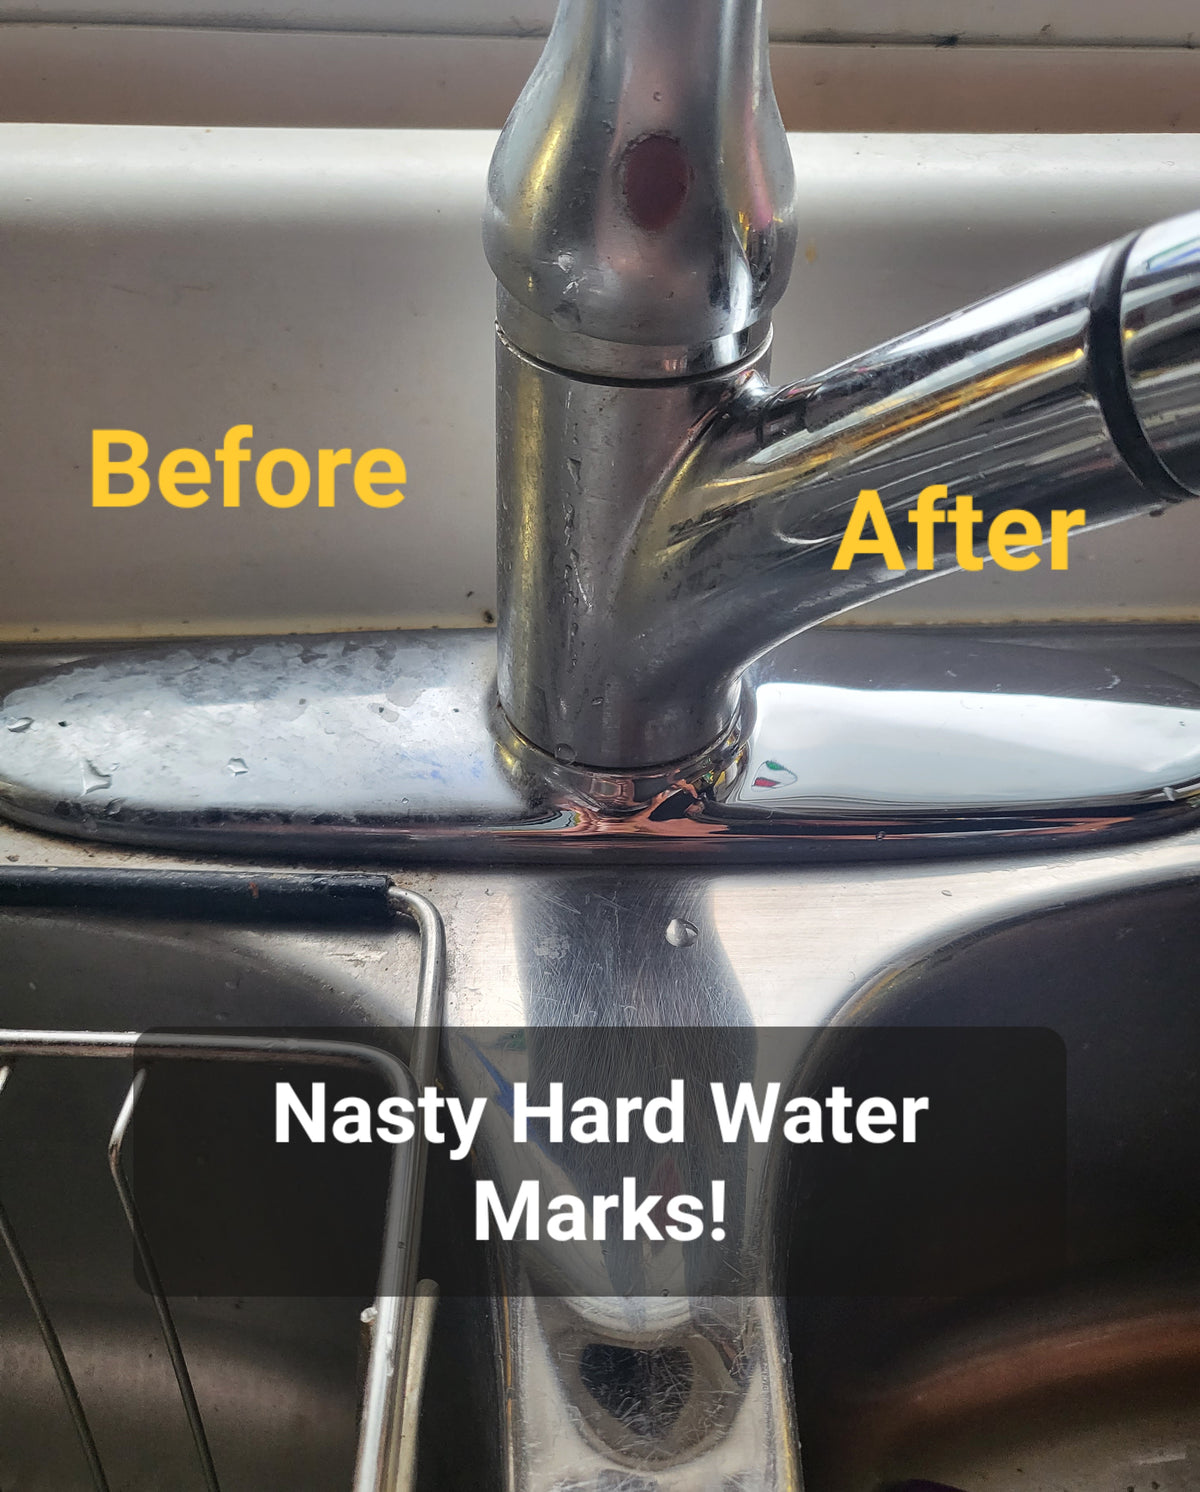 Before and after cleaning kitchen facet from grime and hard water stains.